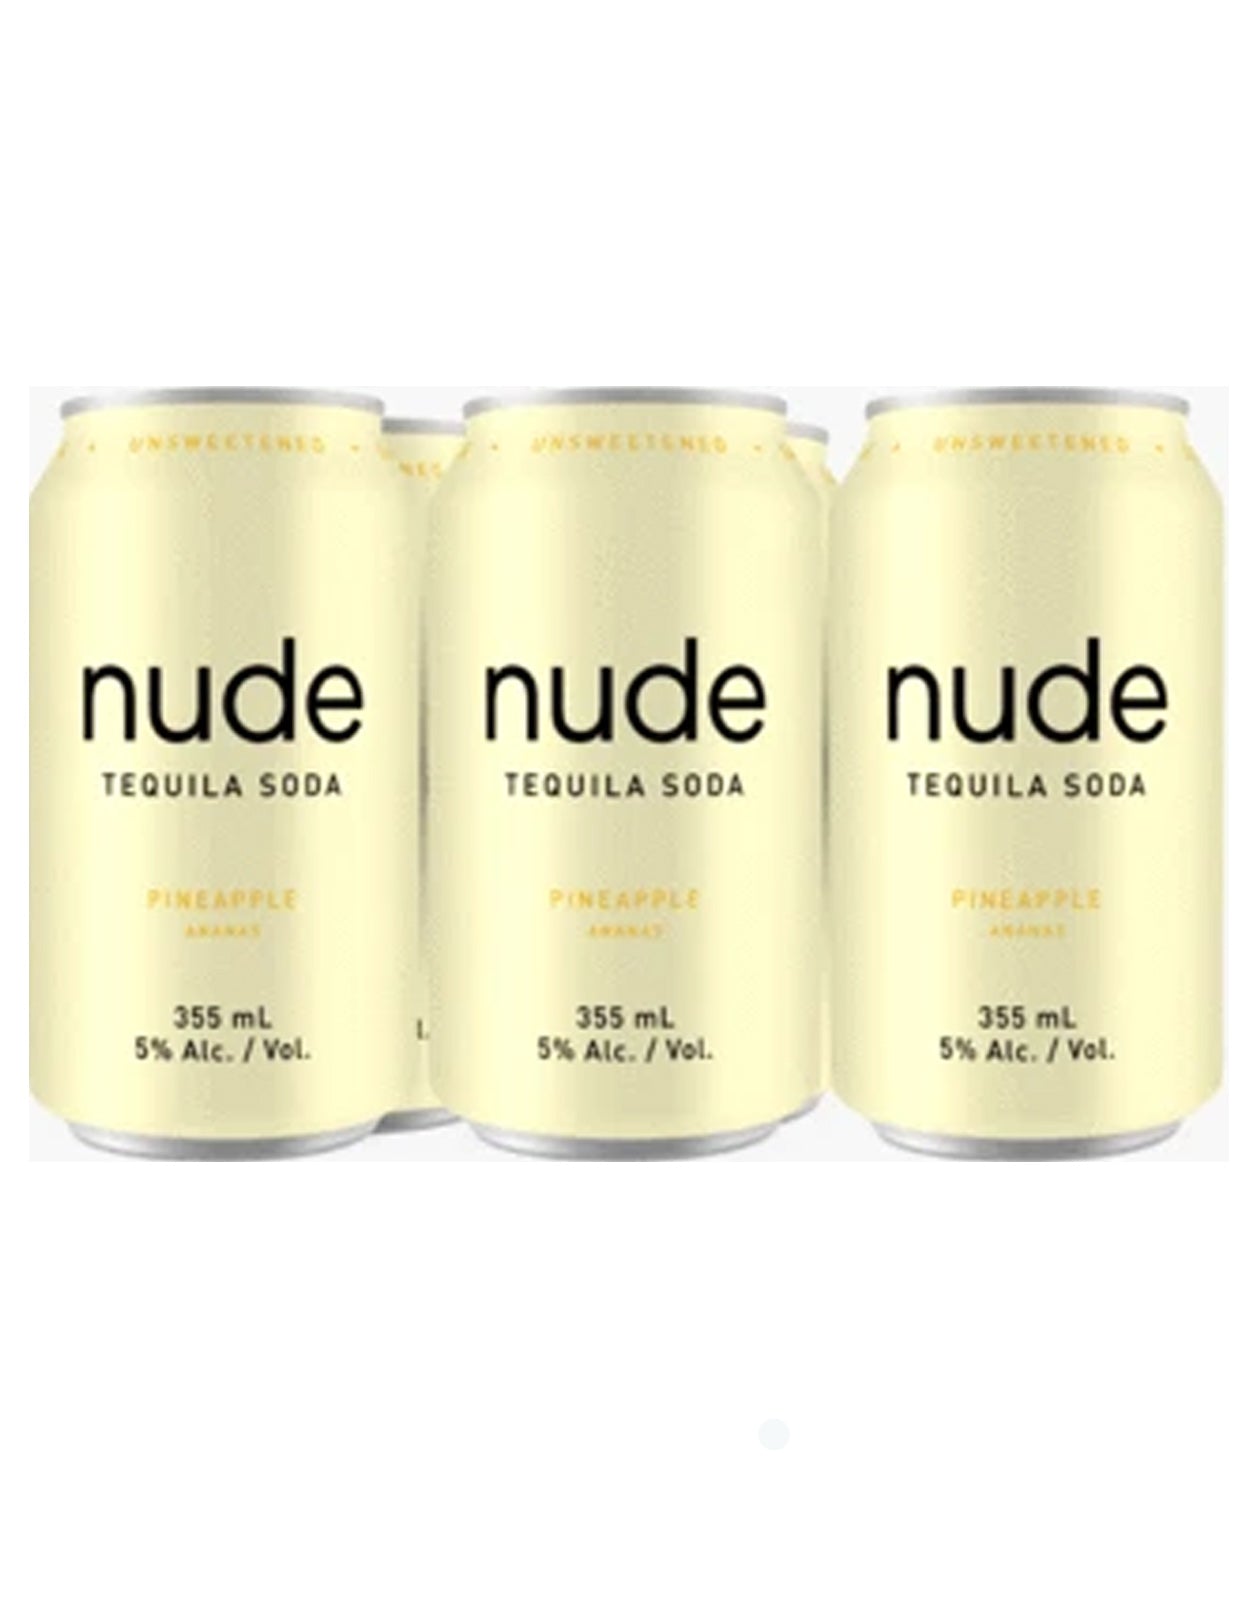 Nude Tequila Soda Pineapple 355 ml - 6 Cans